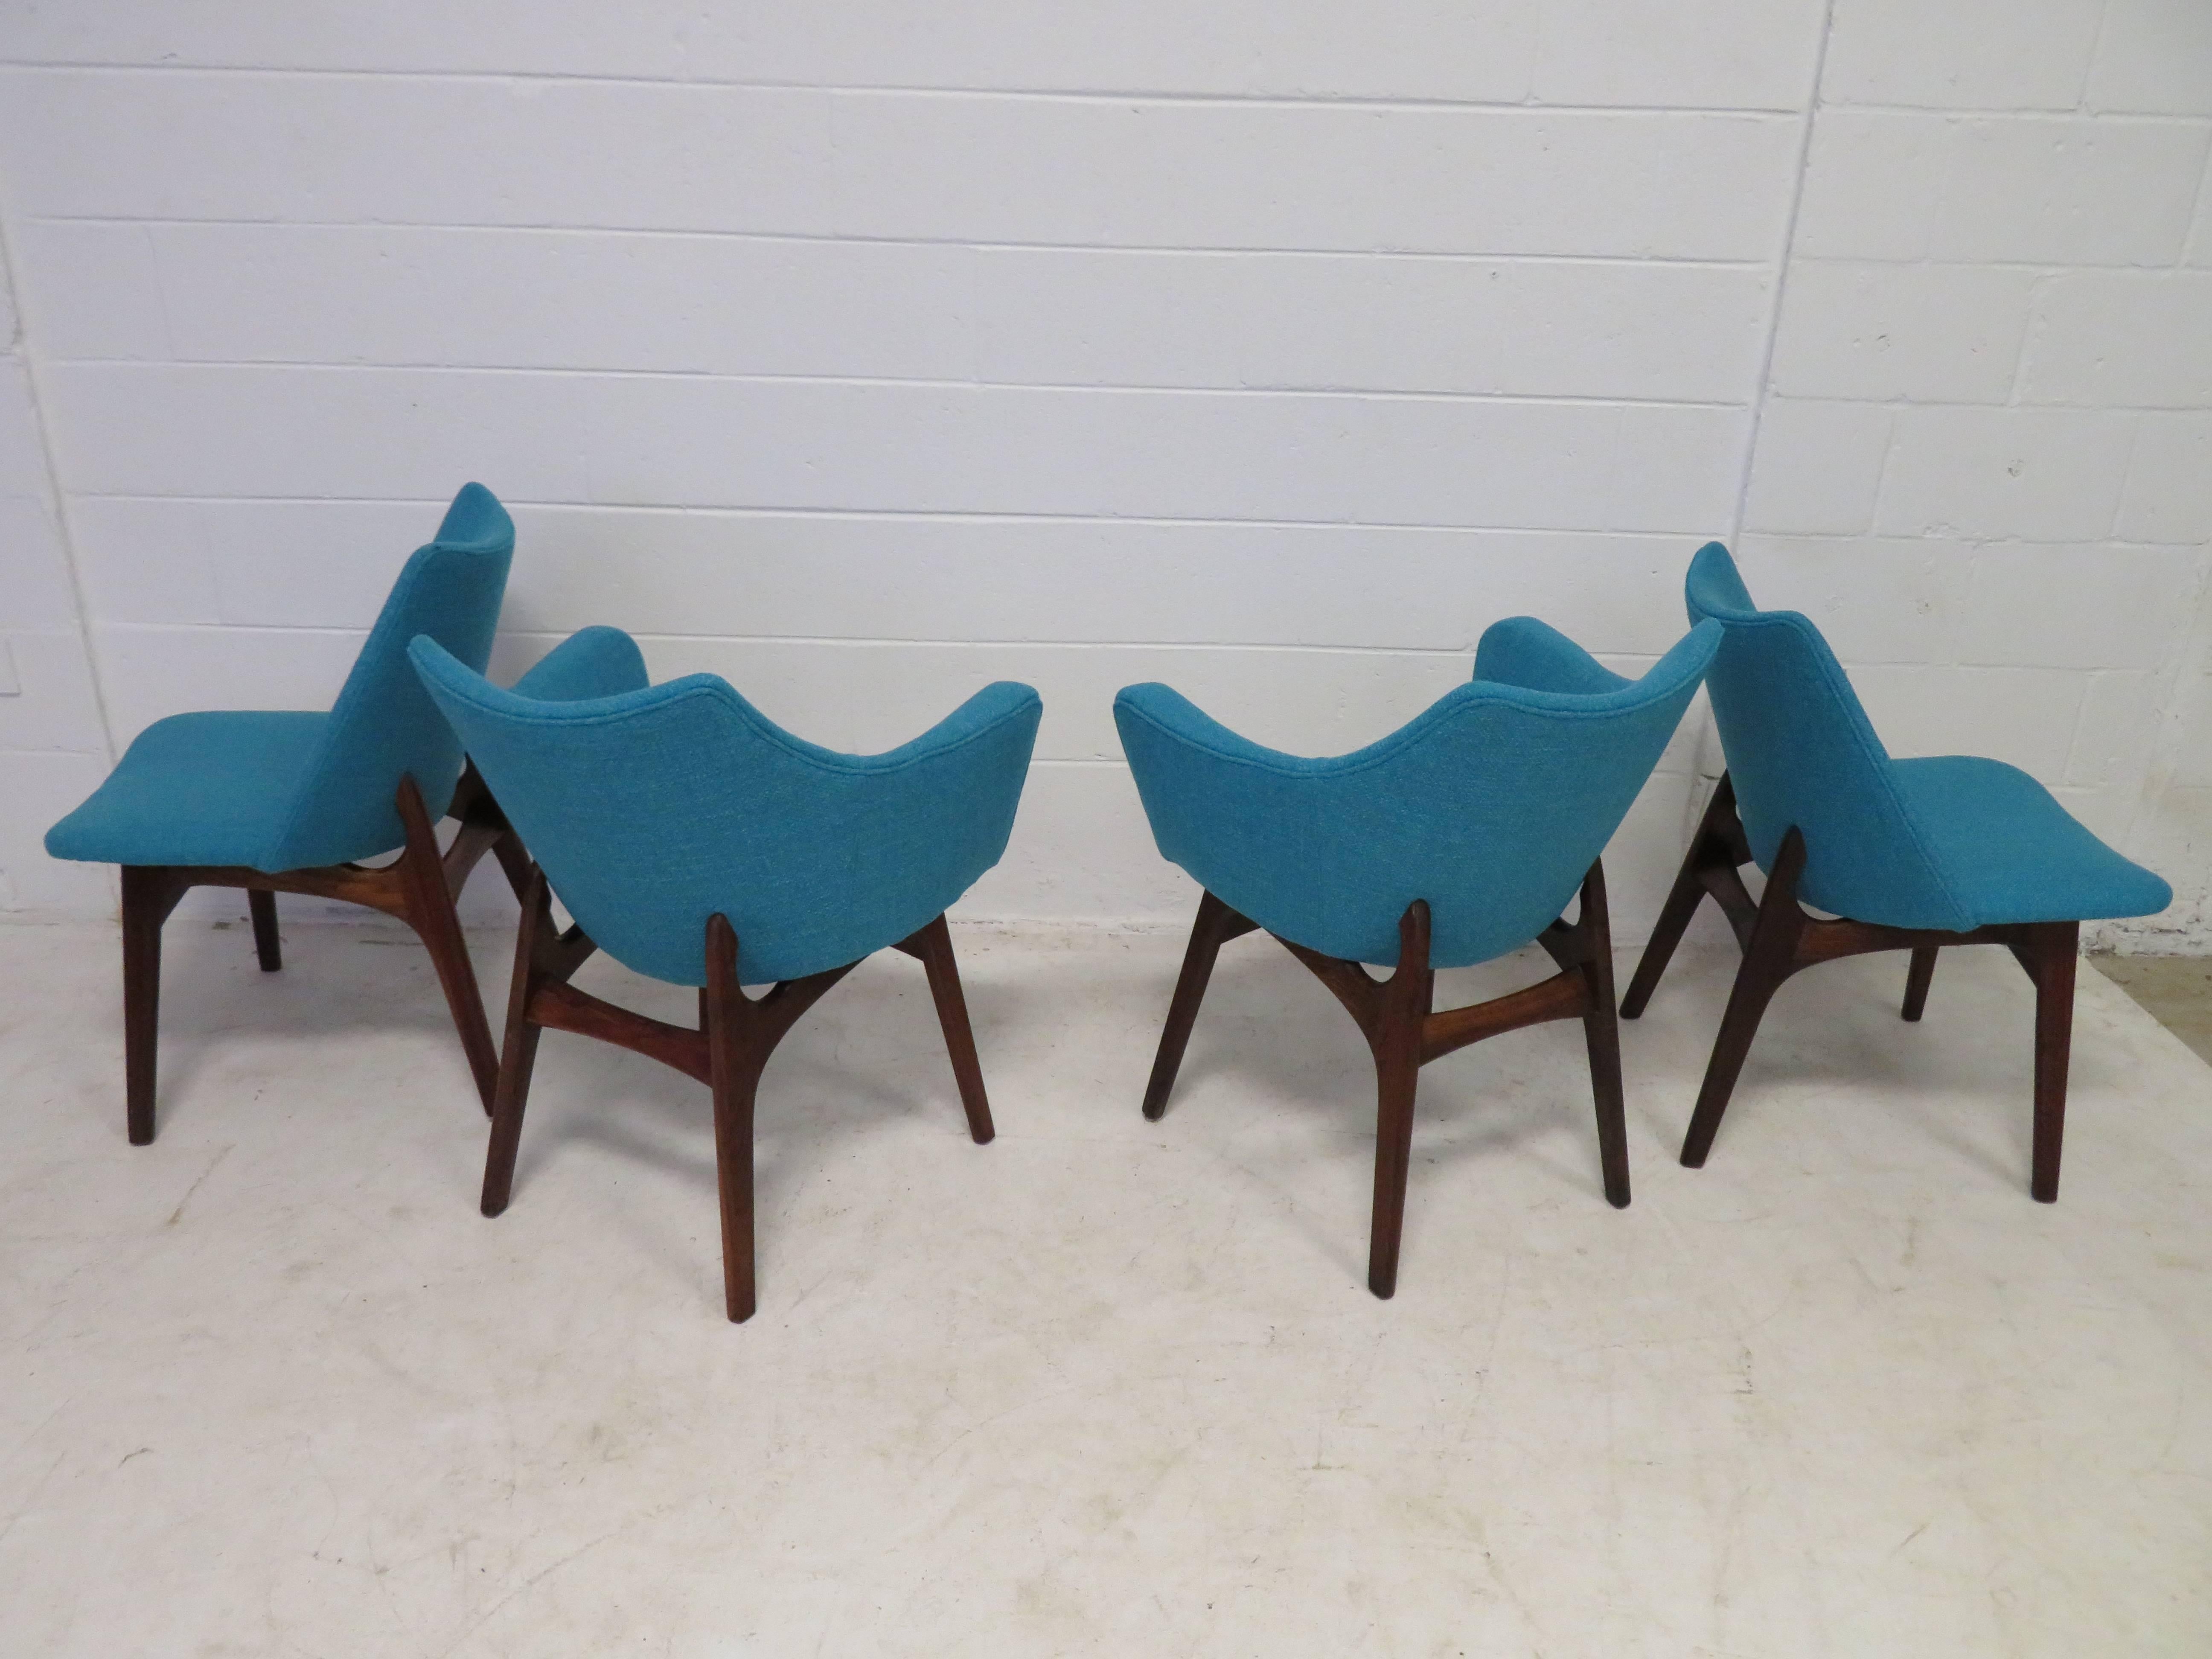 Fabulous set of four Adrian Pearsall sculptural walnut dining chairs. The set consists of two armchairs and two side chairs. They have been reupholstered in a wonderful period appropriate nubby woven fabric in a cool turquoise. We have many Adrian